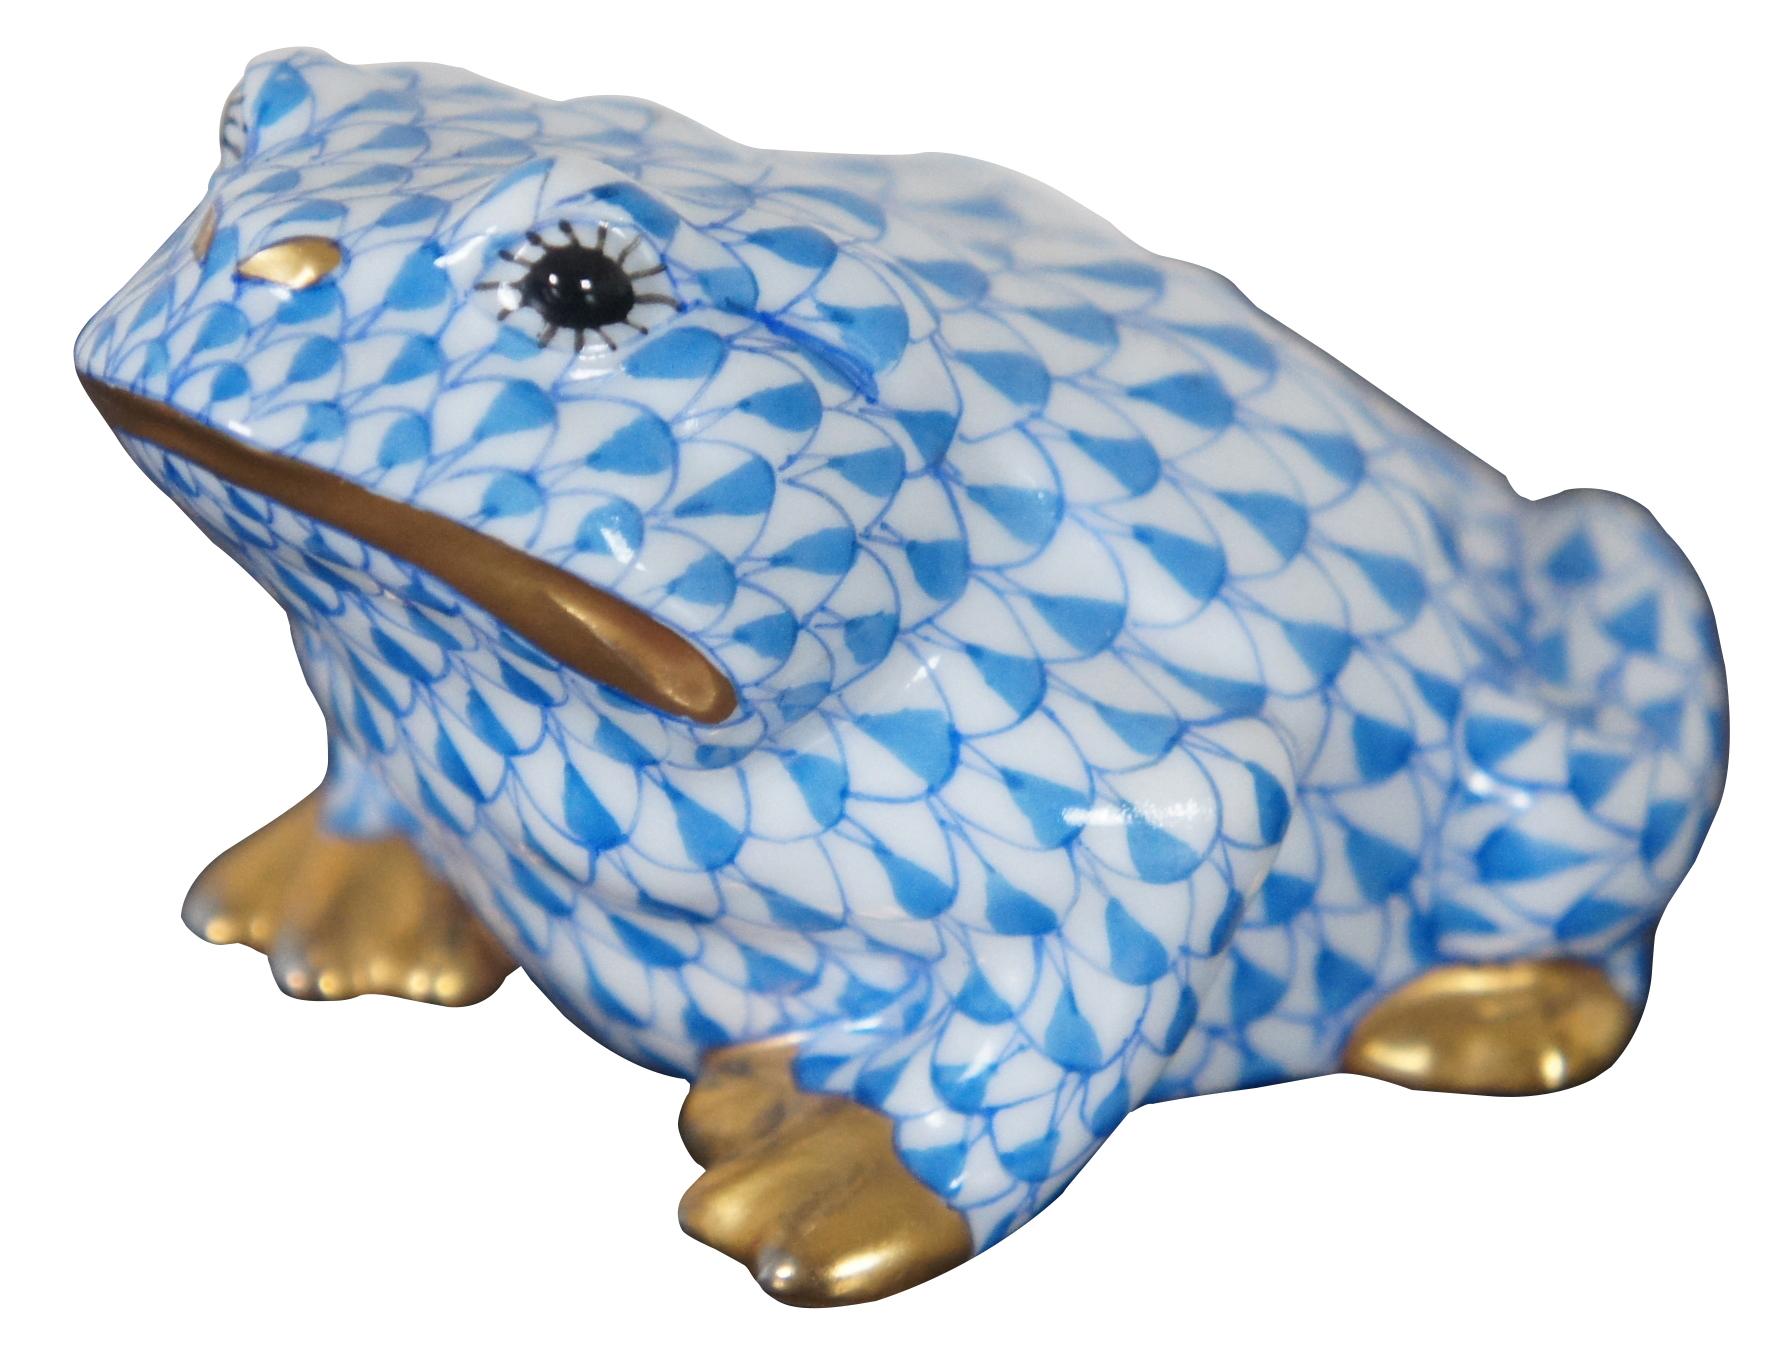 Pair of Herend Hungary fishnet hand painted patterned porcelain frogs or toads in blue and green with gold accents.
   